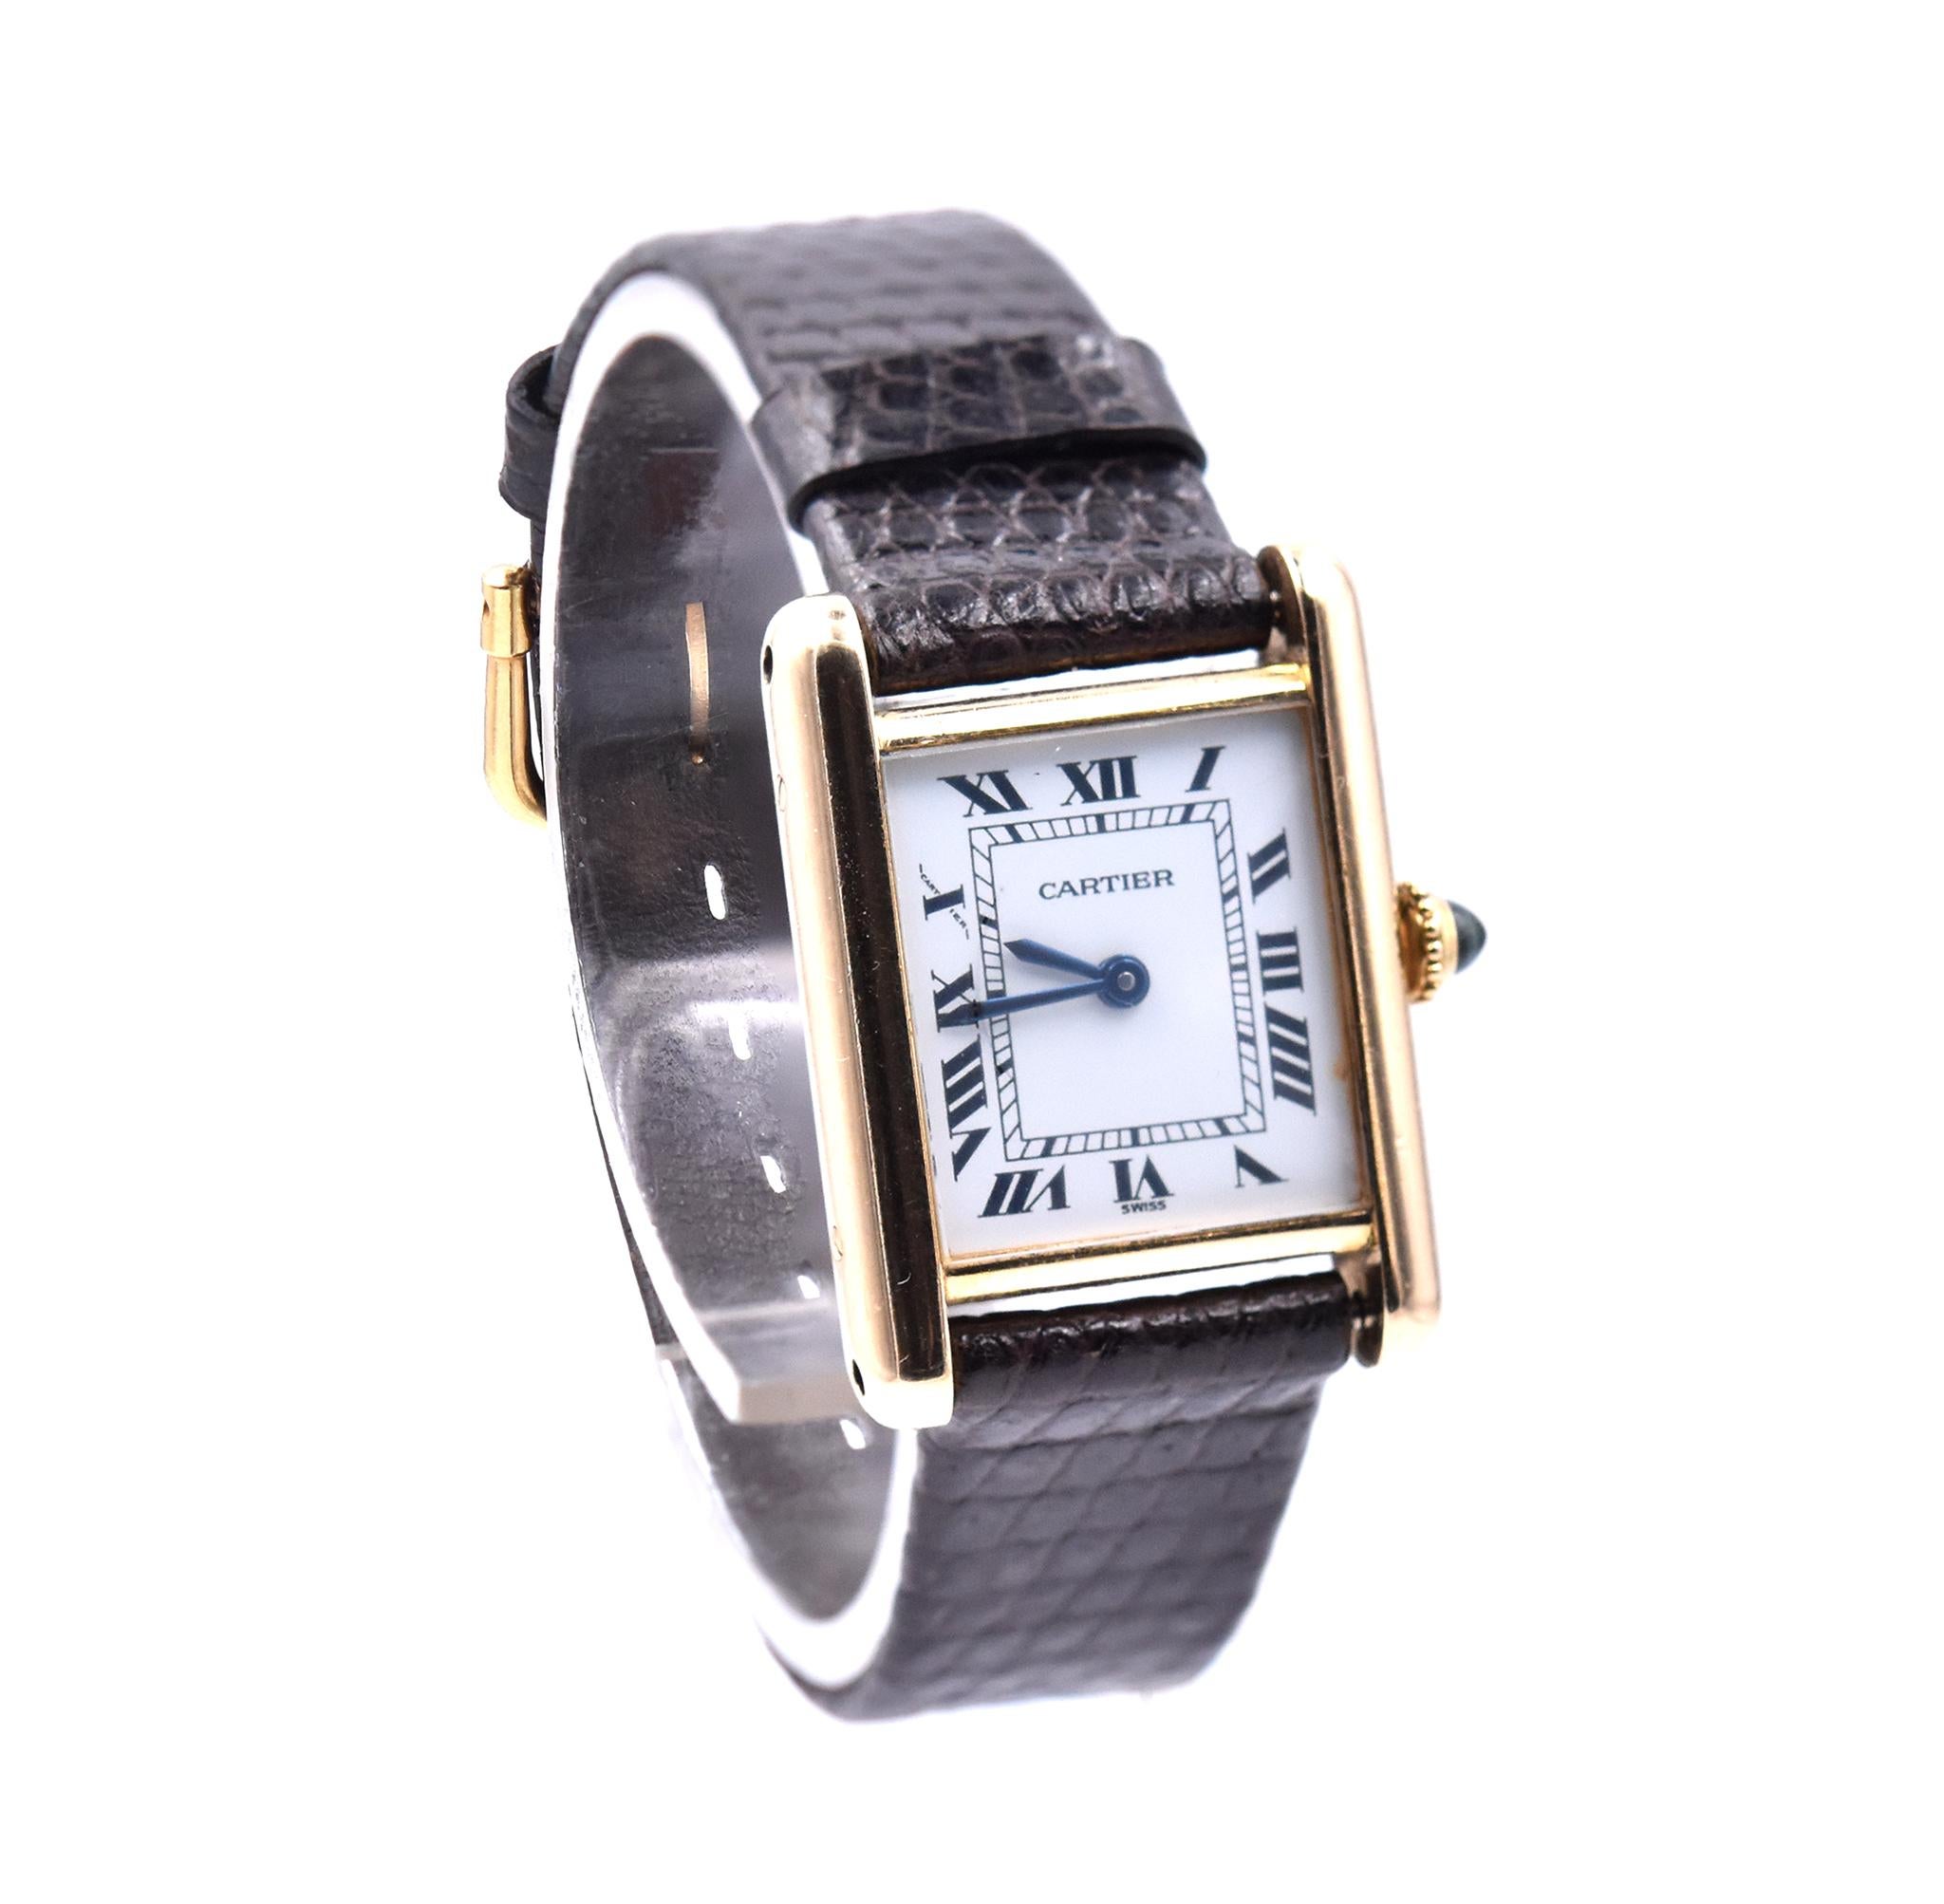 Movement: quartz
Function: hours, minutes
Case: 27 X20 mm rectangular case, push pull crown, sapphire crystal
Dial: white arabic dial
Band: black lizard strap with buckle
Serial #: 780874XXX
Reference: 21580

No box or papers
Guaranteed to be